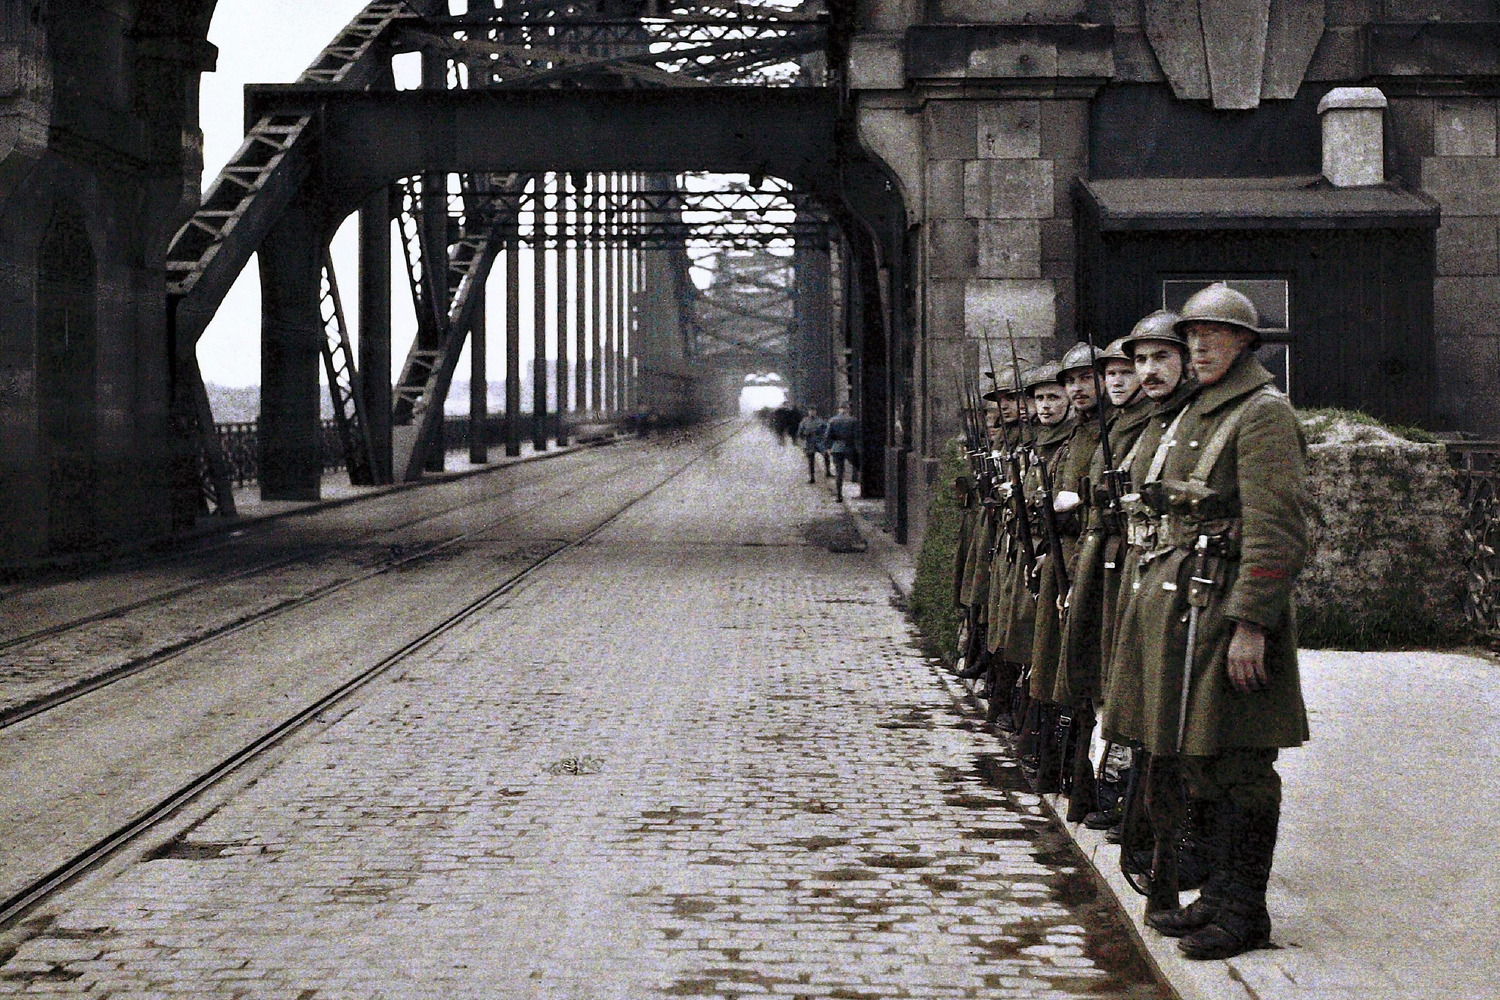 Belgian soldiers guarding a bridge after the beginning of the occupation of the Demilitarized 
                              Zone in the Rhineland carried out by Belgian and French troops,
                              Germany, 1921.